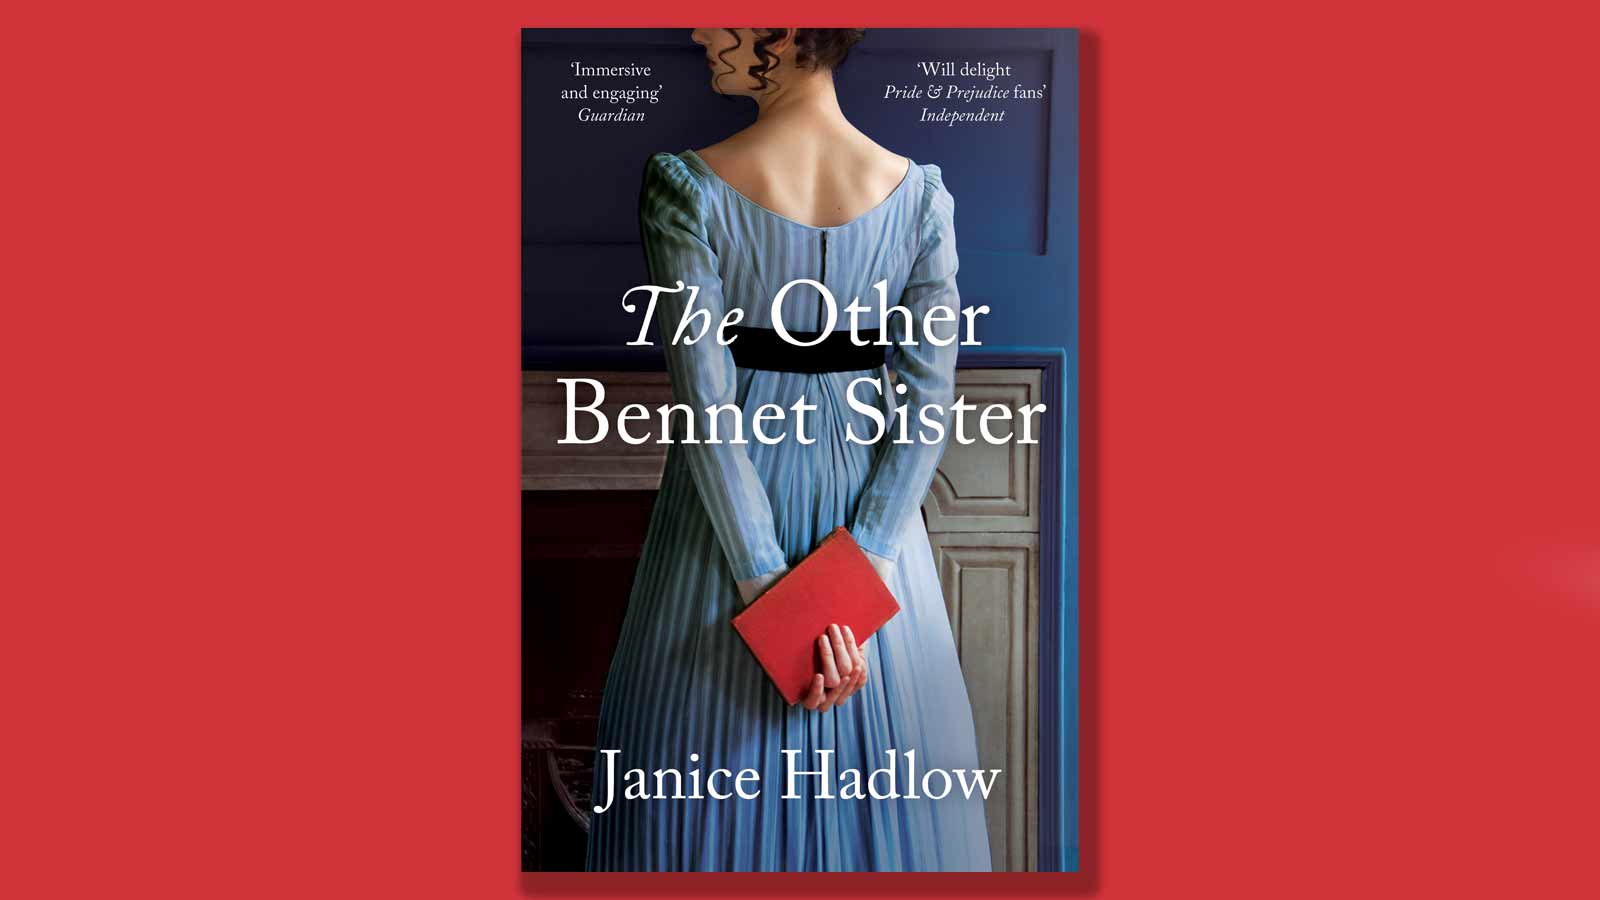 The Other Bennet Sister book cover